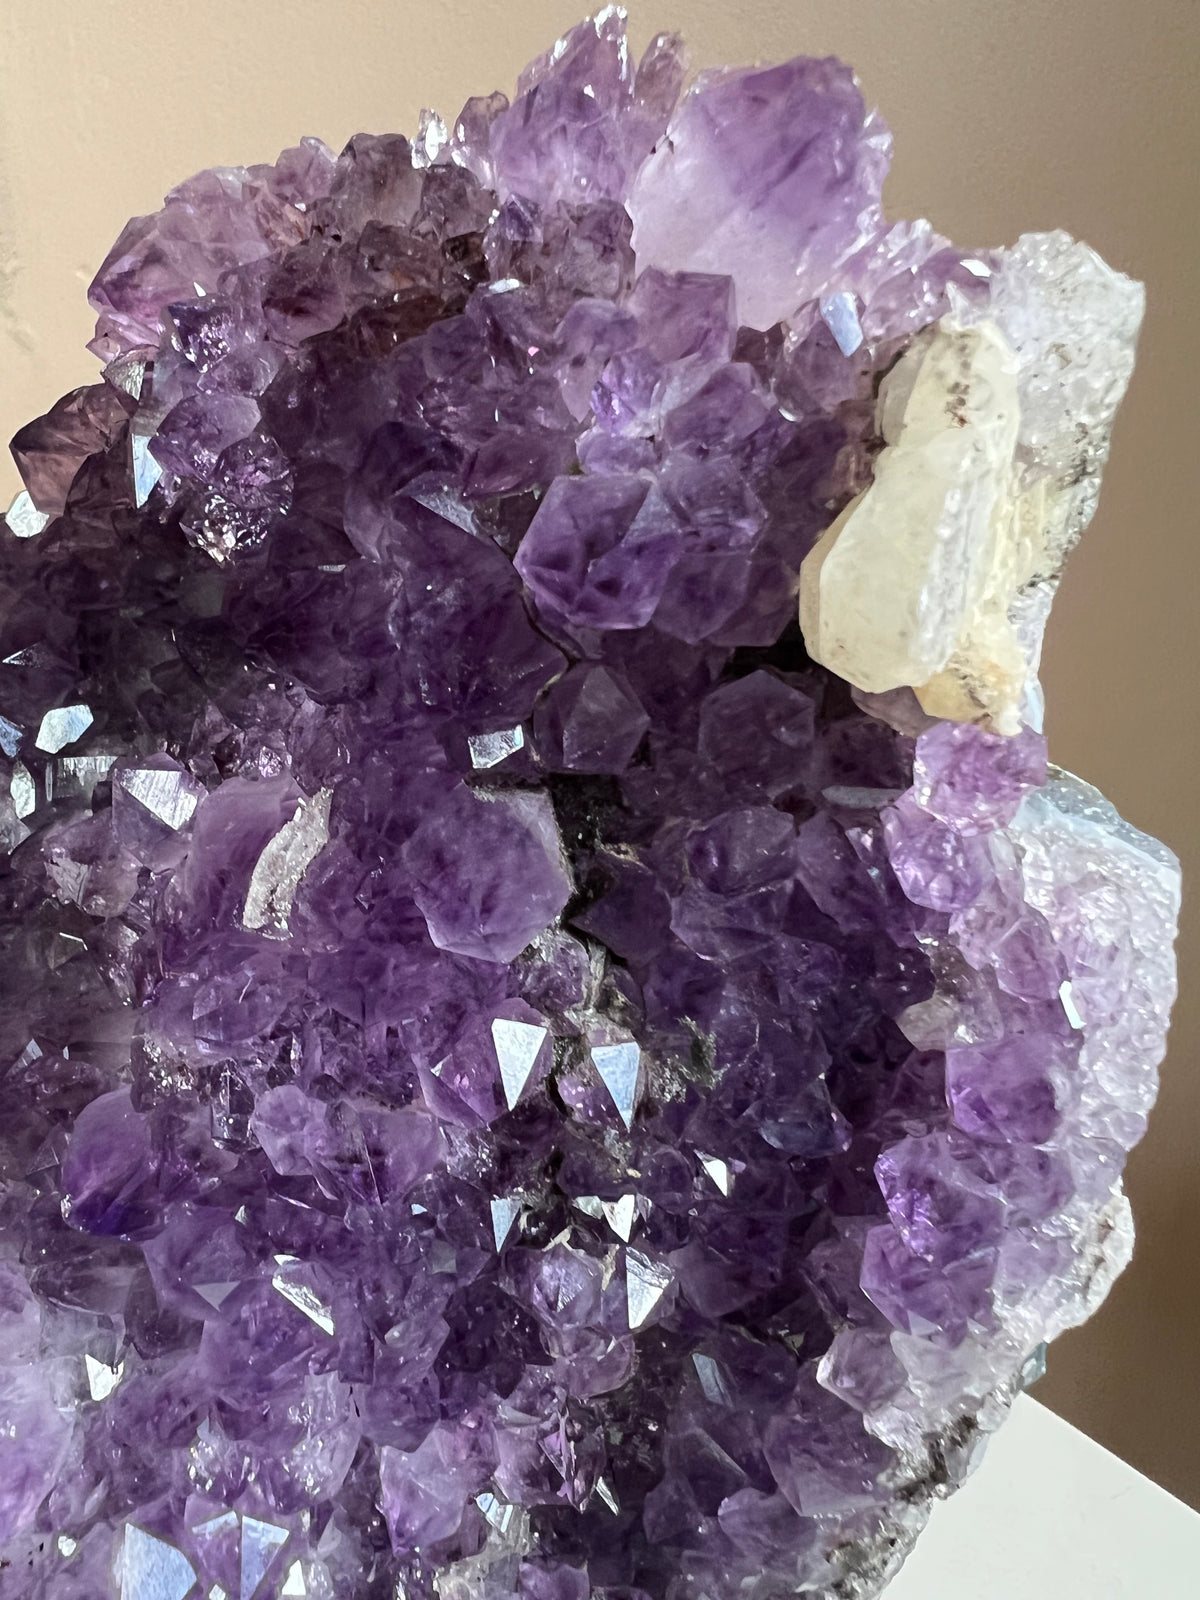 Brazilian  Amethyst w/ calcite (Perfectly imperfect)